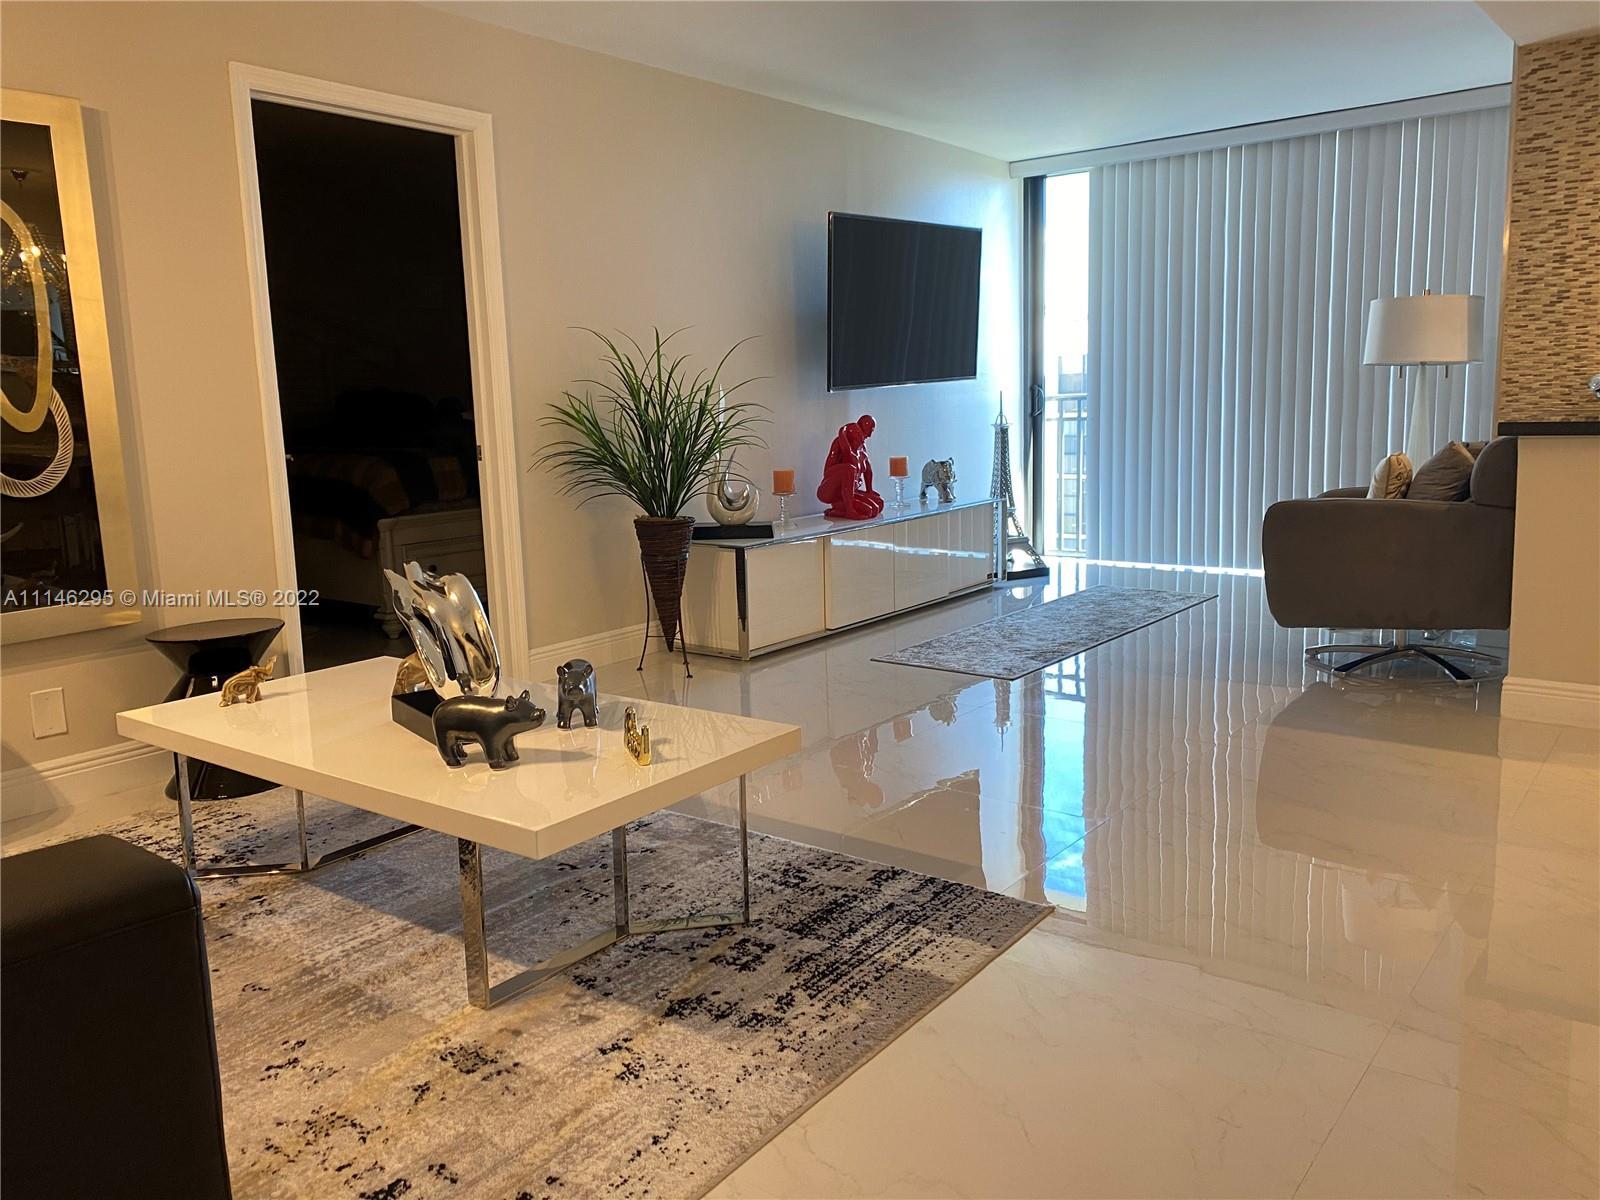 *****EXCELLENT LOCATION **** CLOSE TO LUXURY BUILDING IN CENTER THE SUNNY ISLES BEACH. 2 BEDS & 2 BA